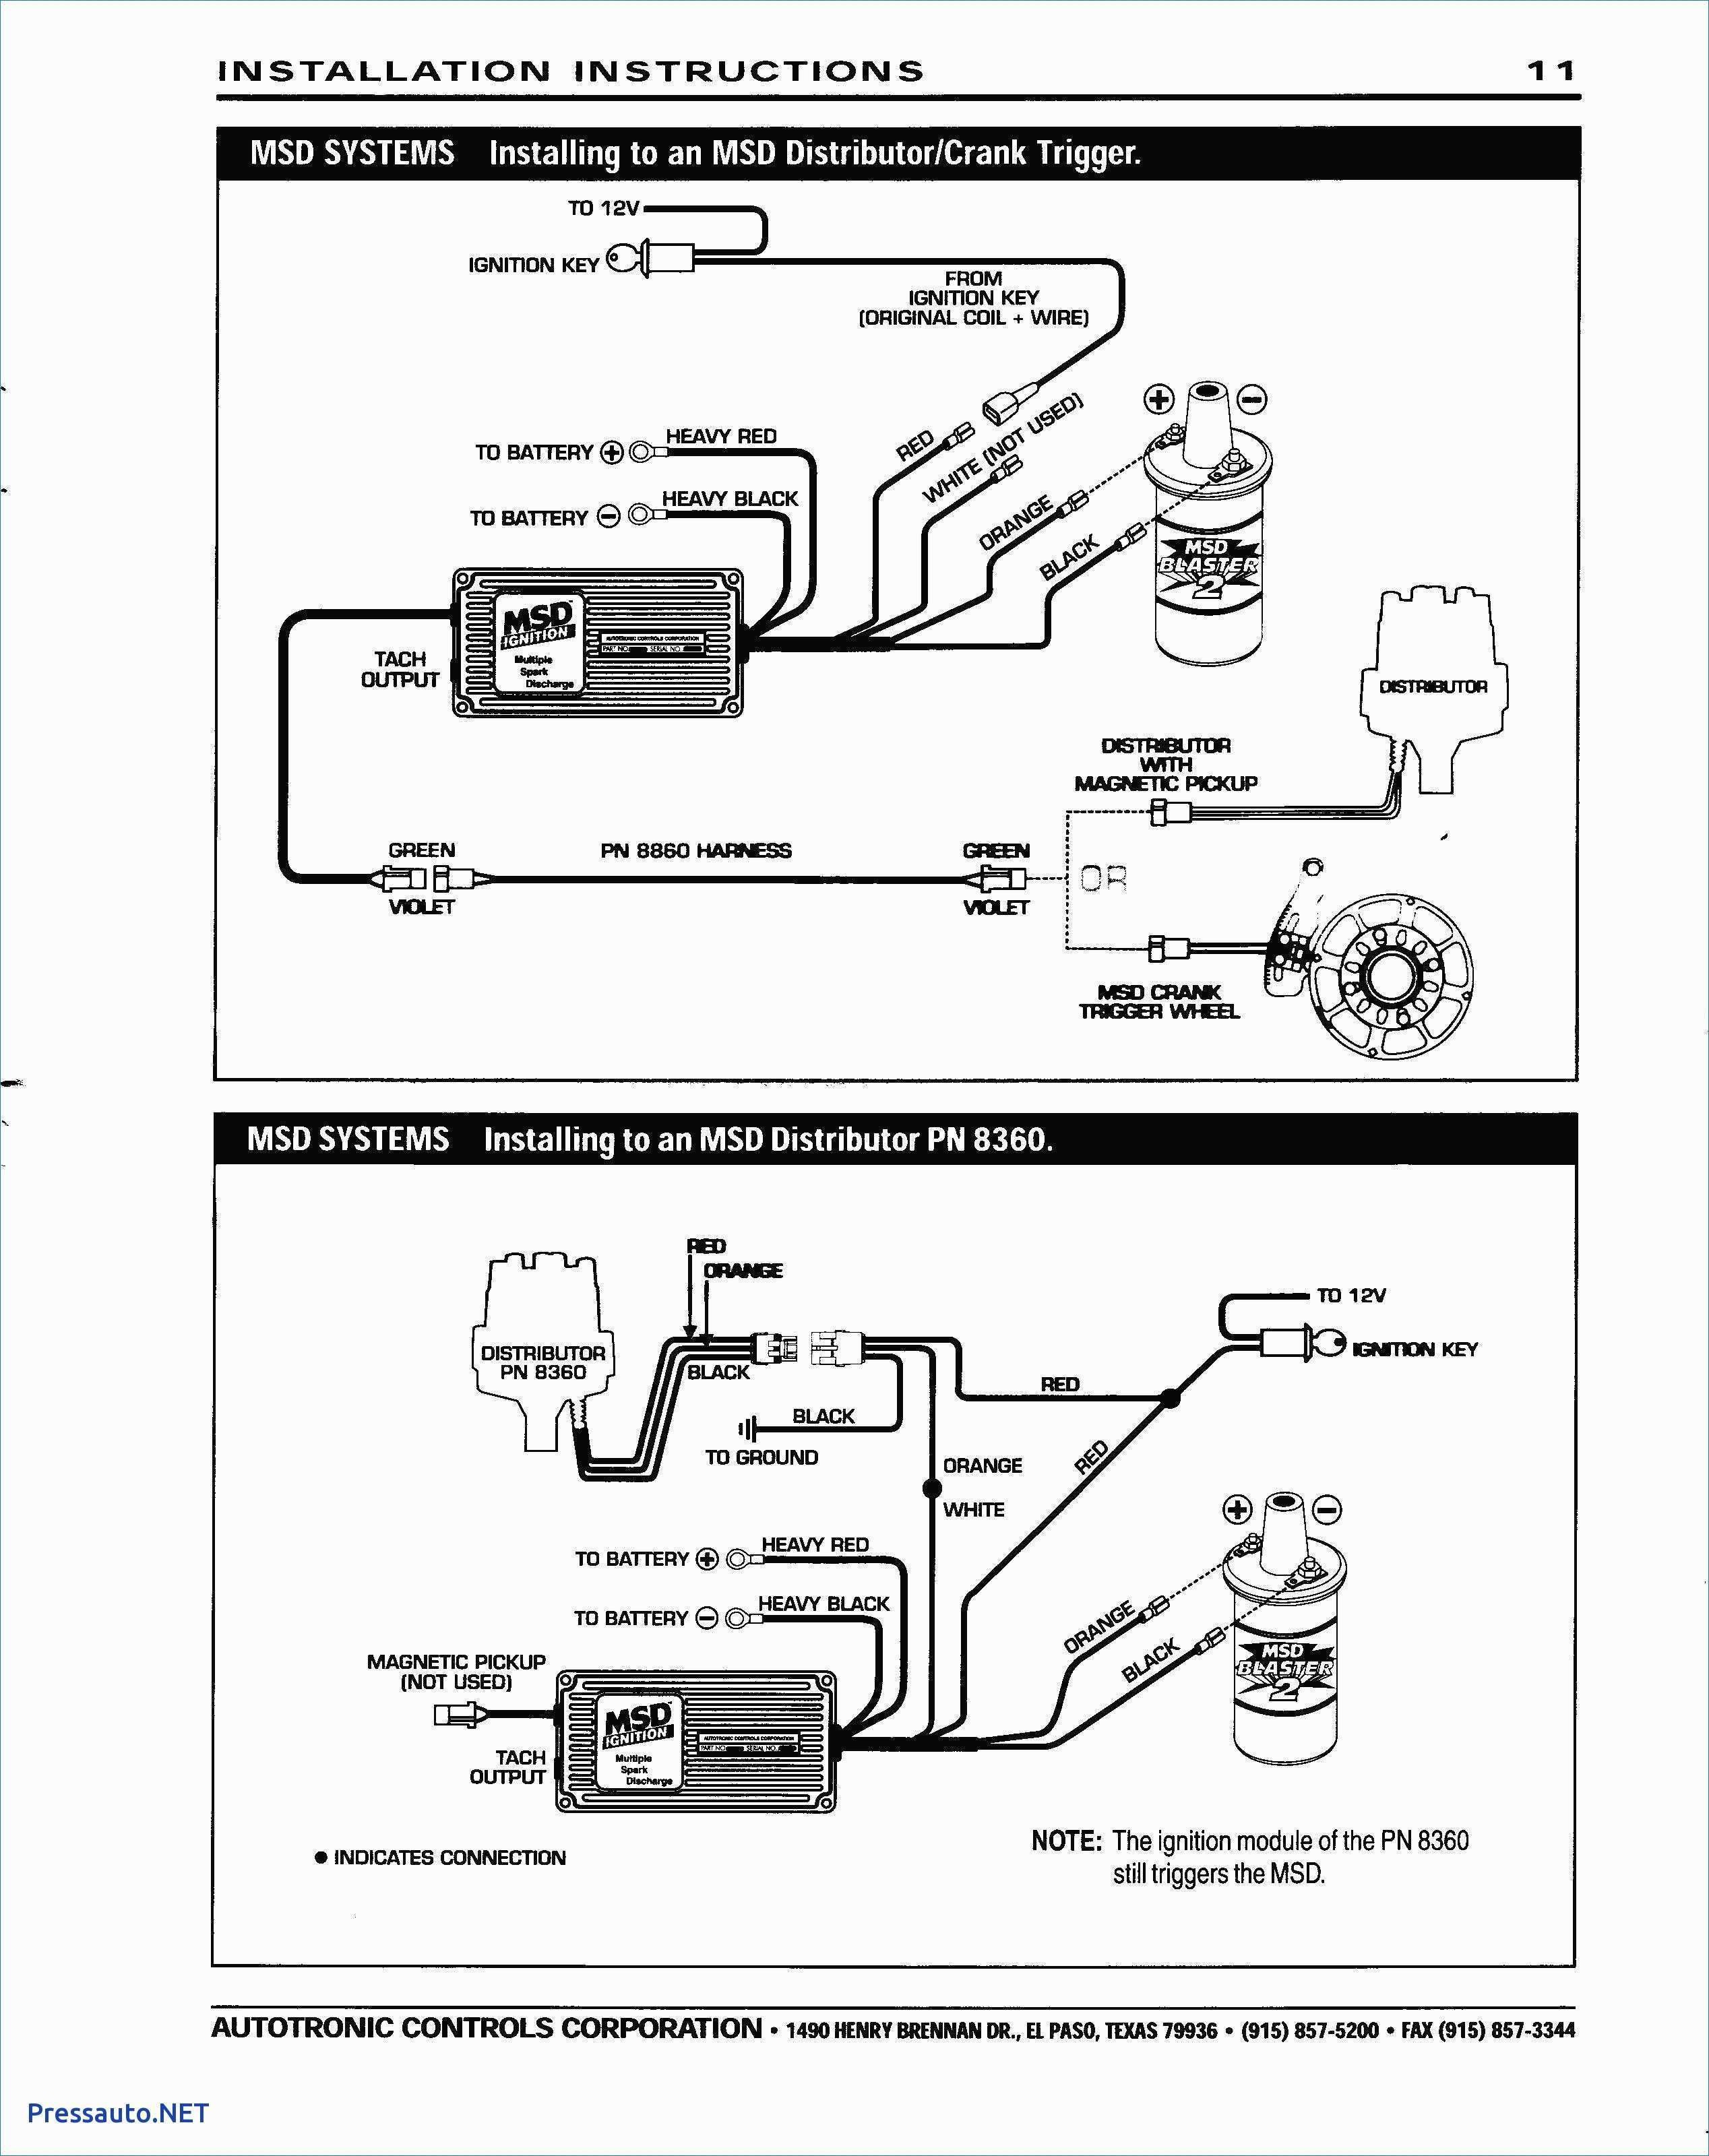 Ignition Wiring Diagram Chevy 350 from mainetreasurechest.com